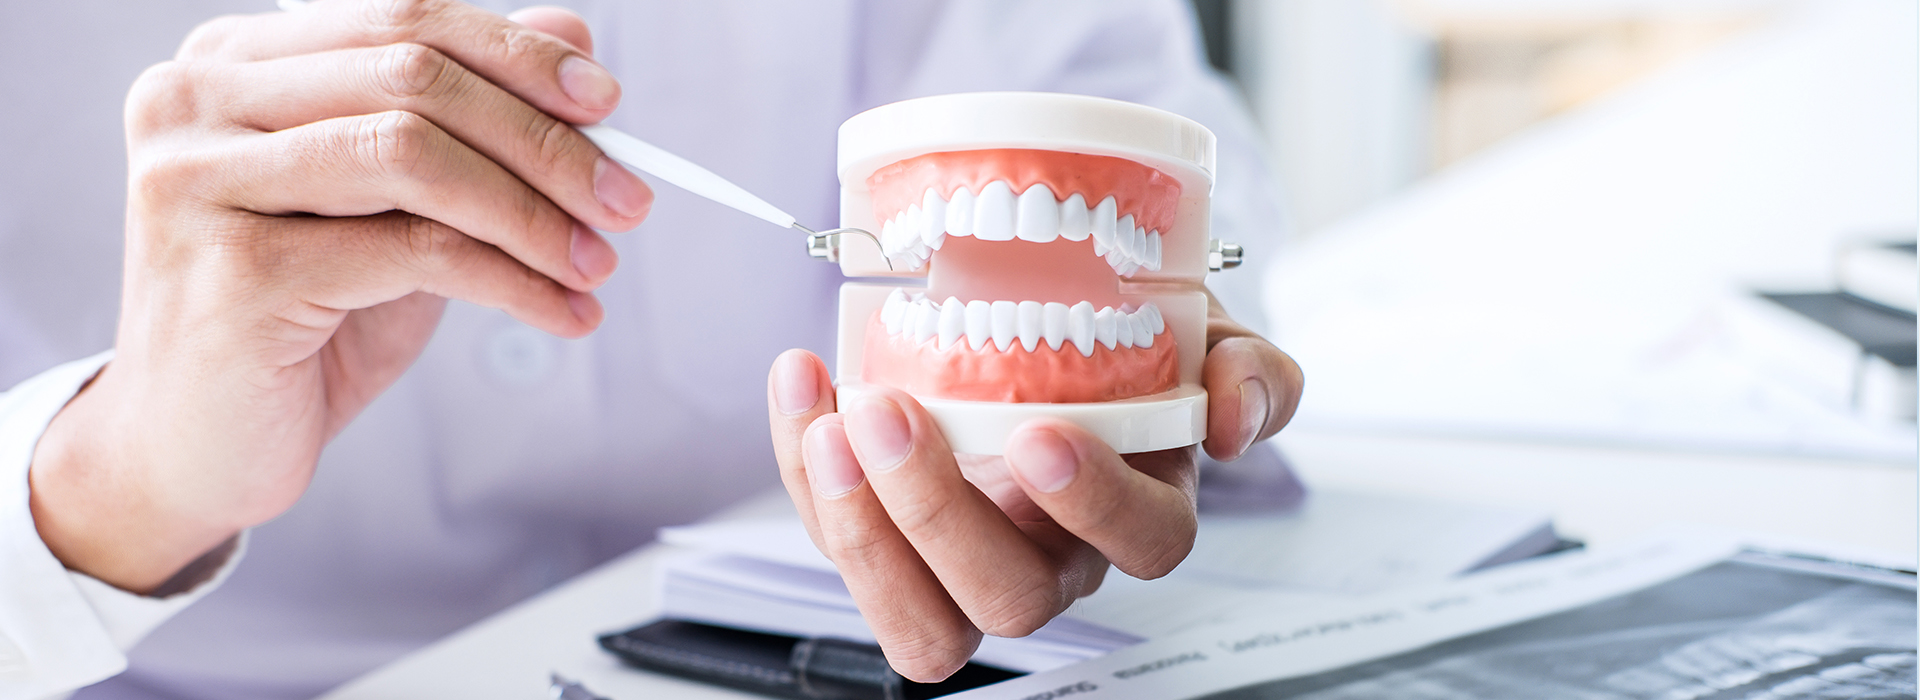 Gregory J. Schmitt, DMD | Root Canals, Dental Fillings and Teeth Whitening